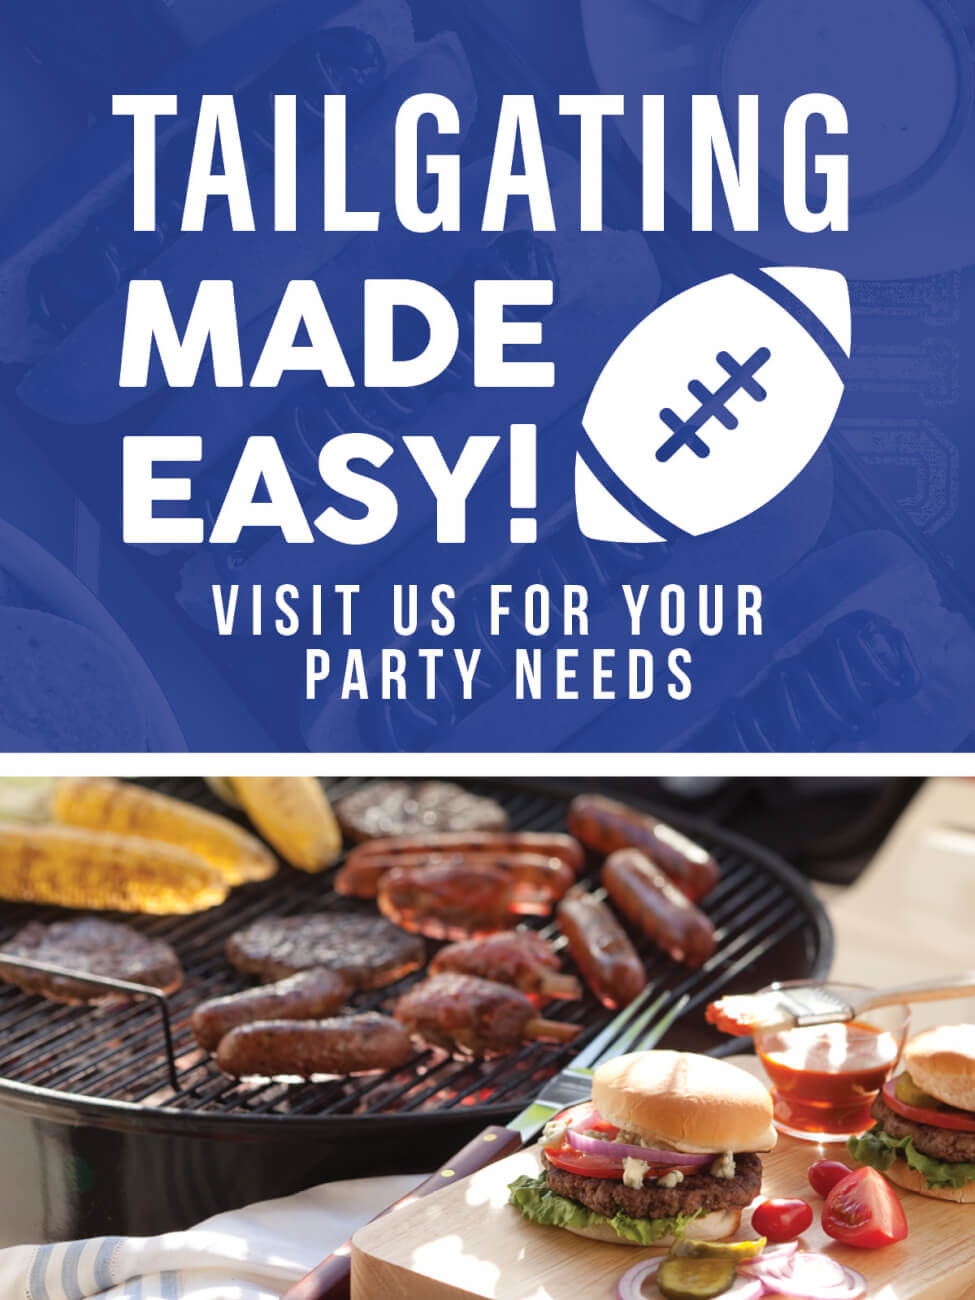 Tailgating Food Items Promotion